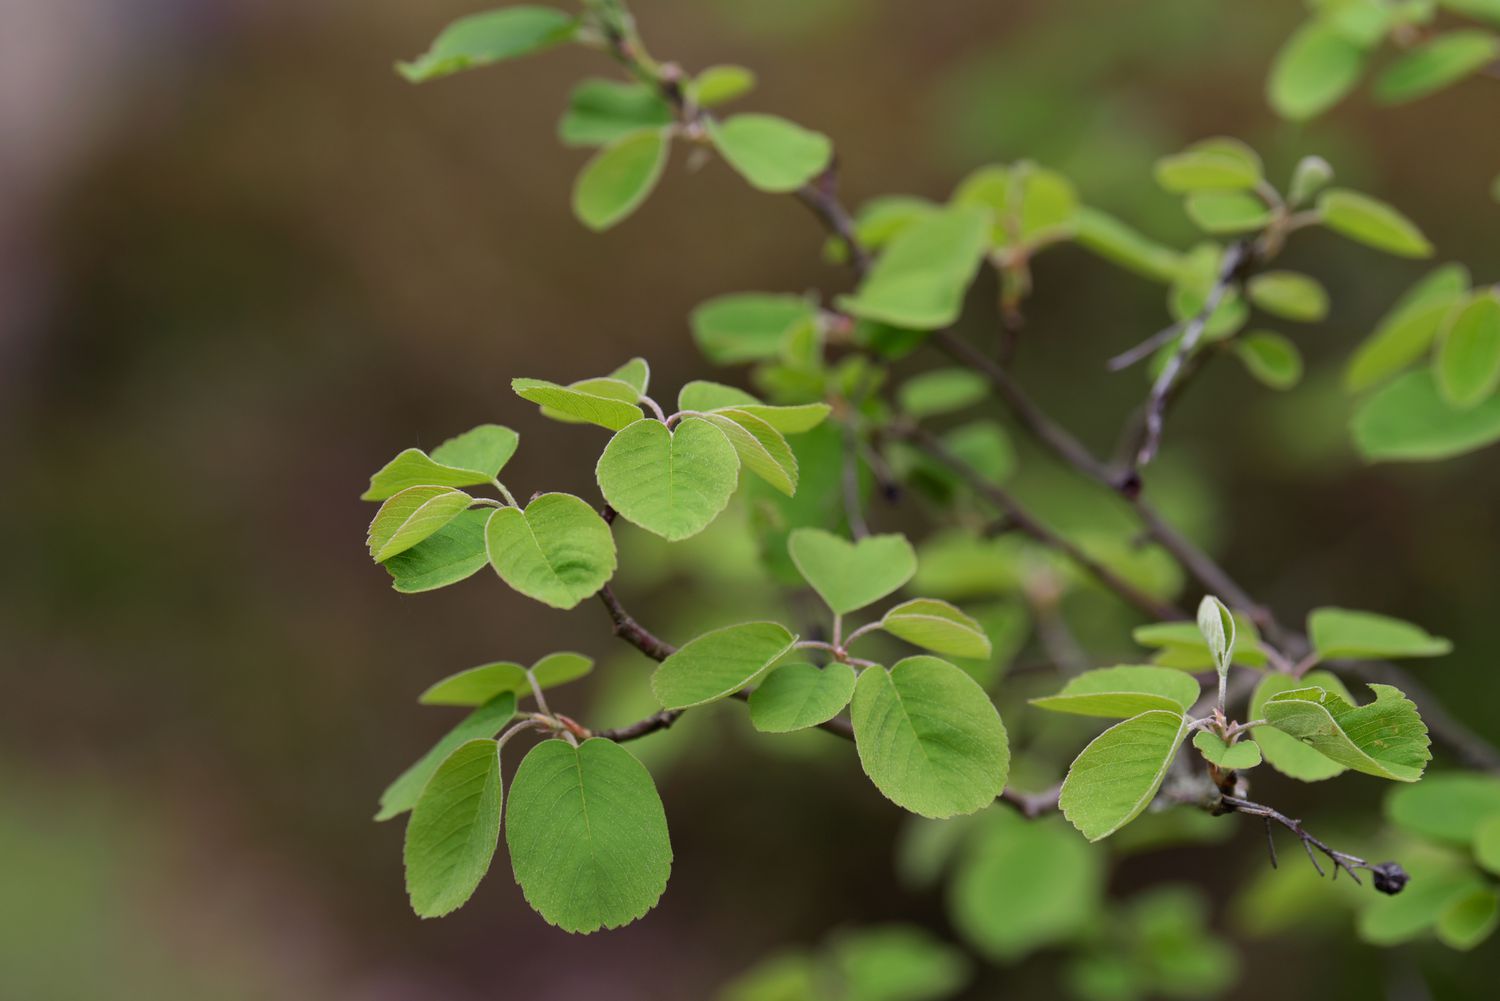 Saskatoon serviceberry tree branches with oval-shaped bright green leaves closeup